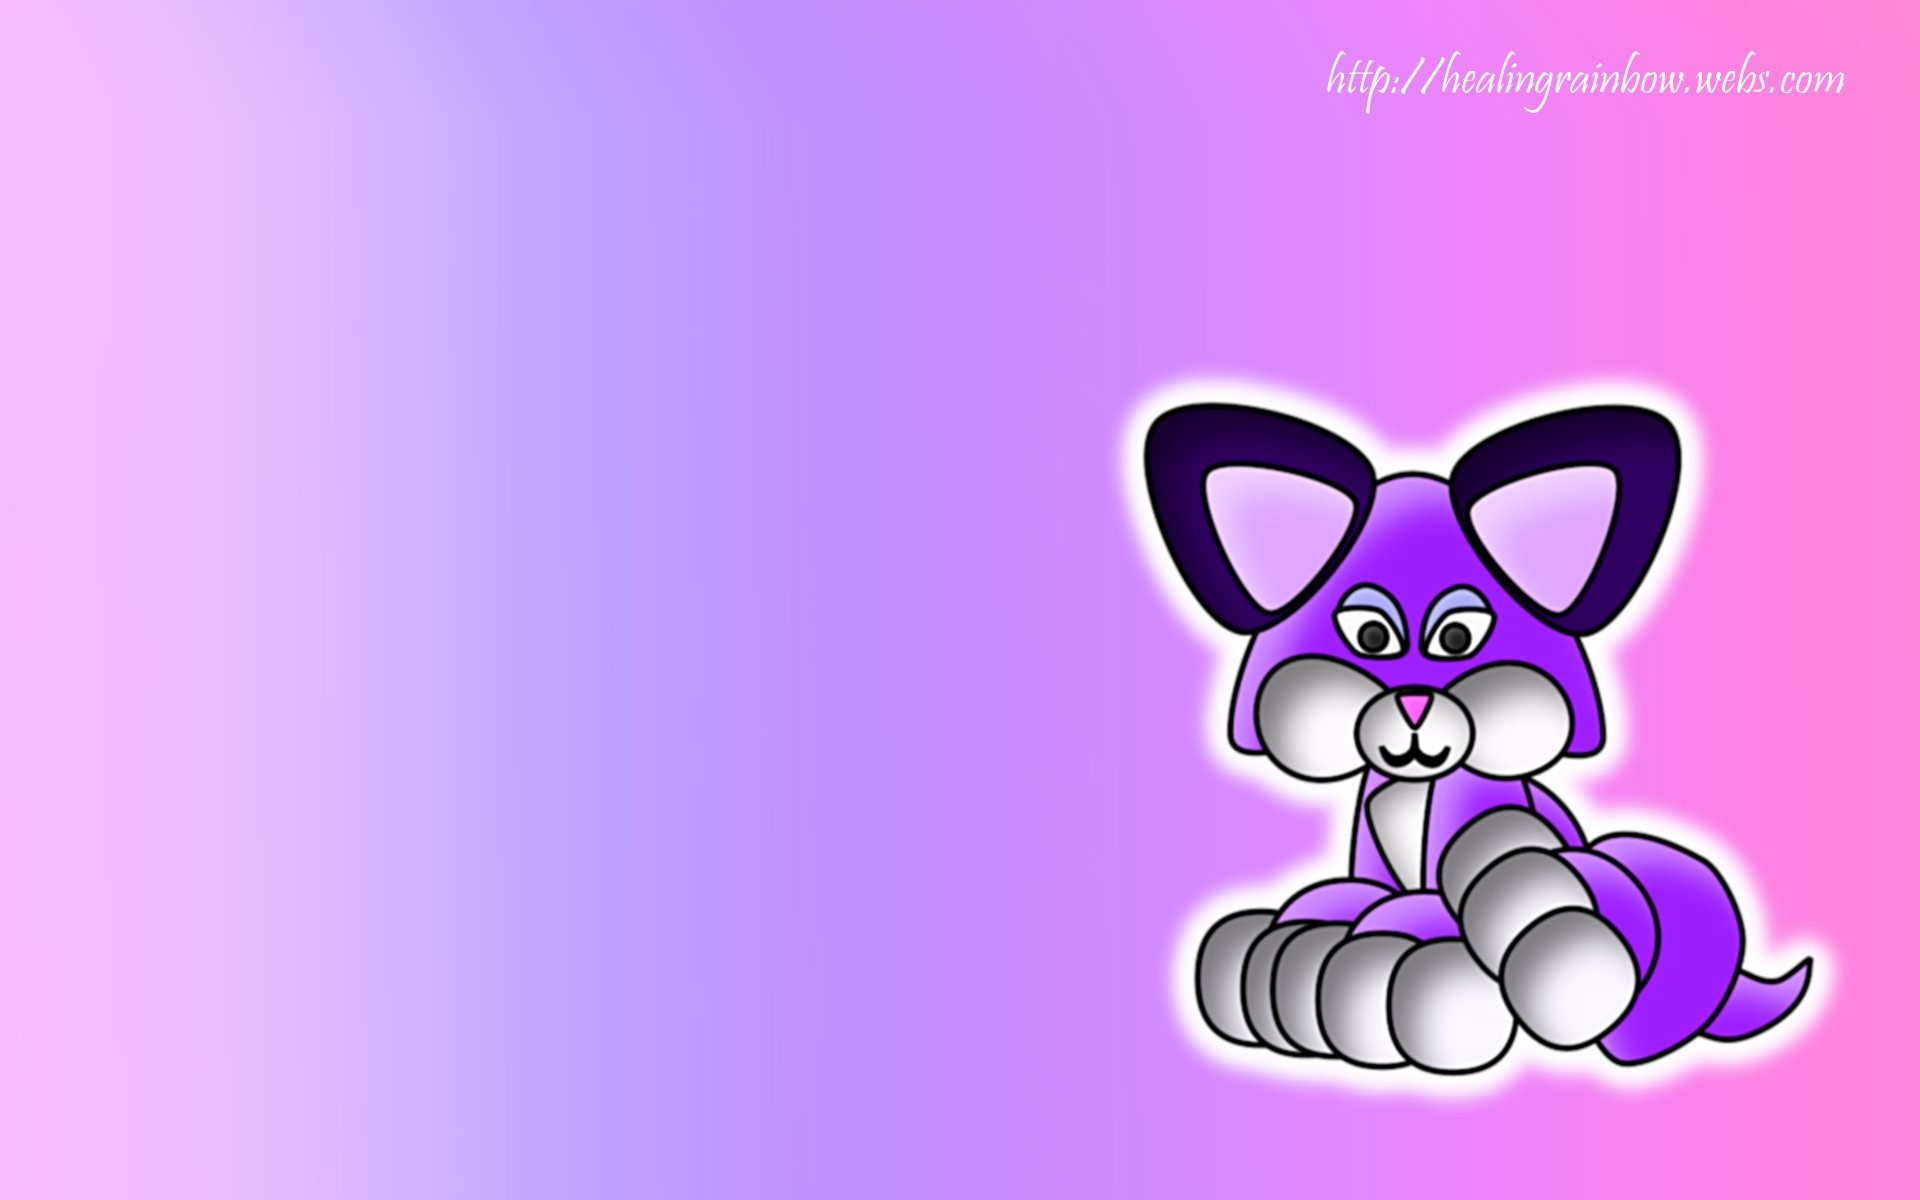 1920x1200 Cutes For Desktop 823262. SHARE. TAGS: Images Other Desktop Backgrounds Background  Cute Purple